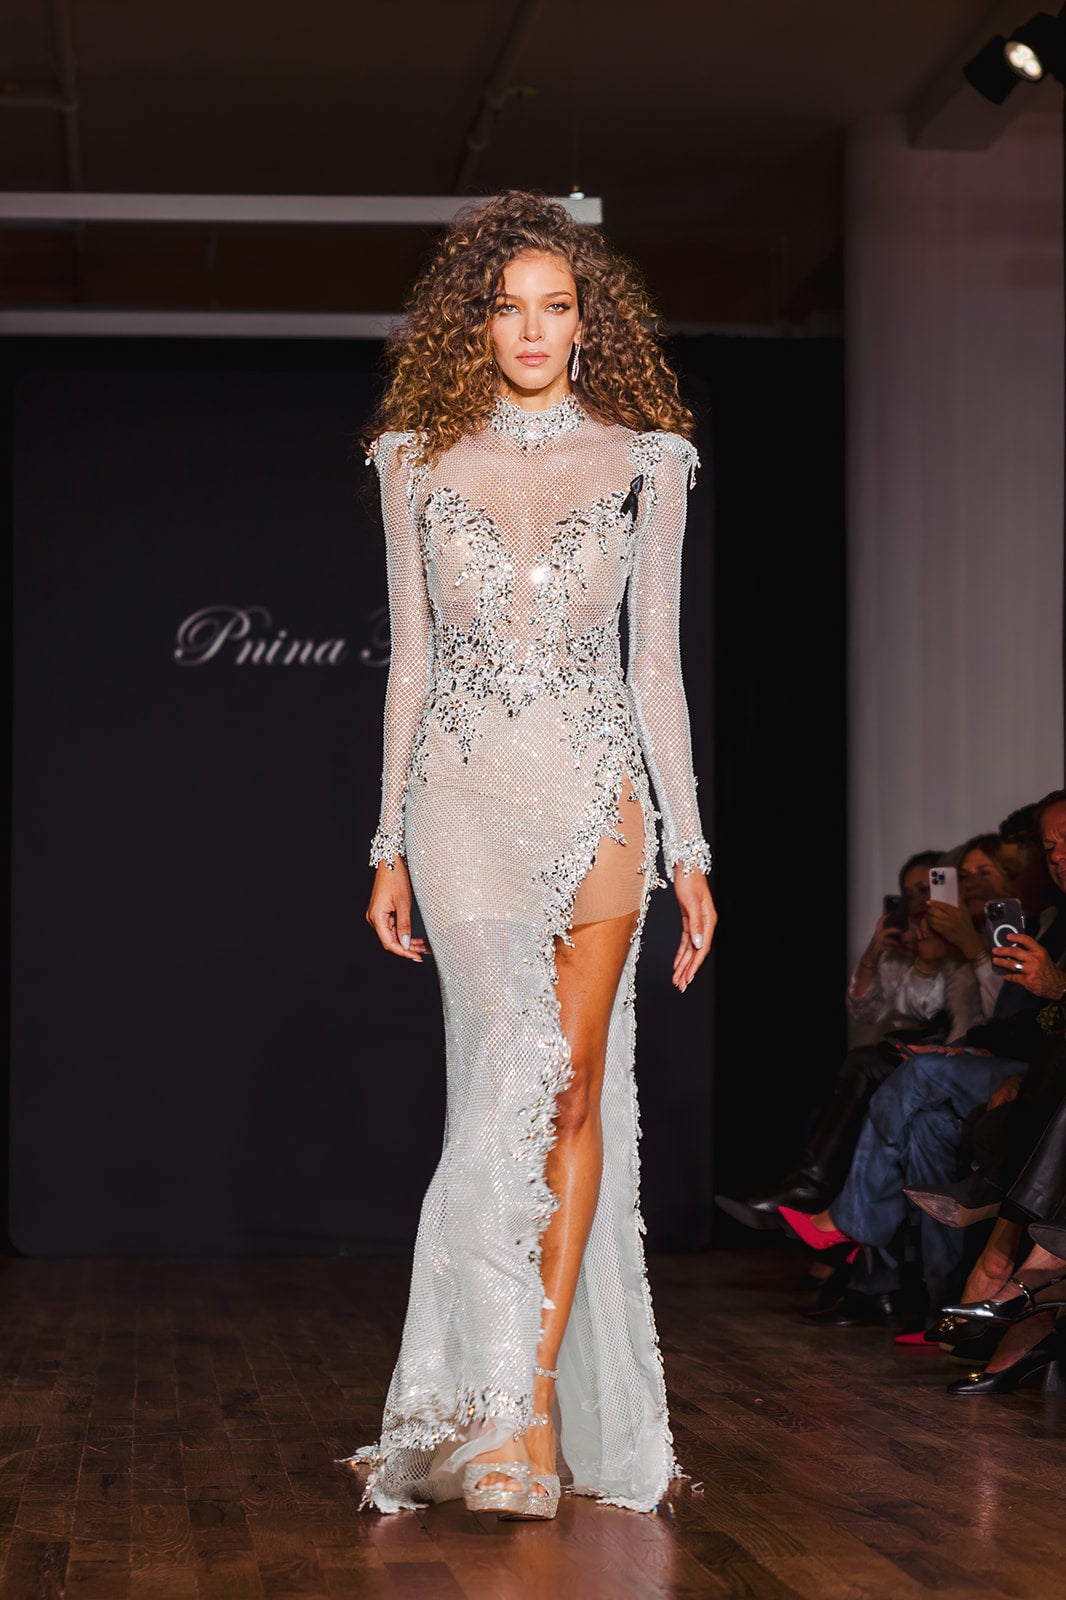 Crystal Sheath Gown With Slit by Pnina Tornai - Image 1